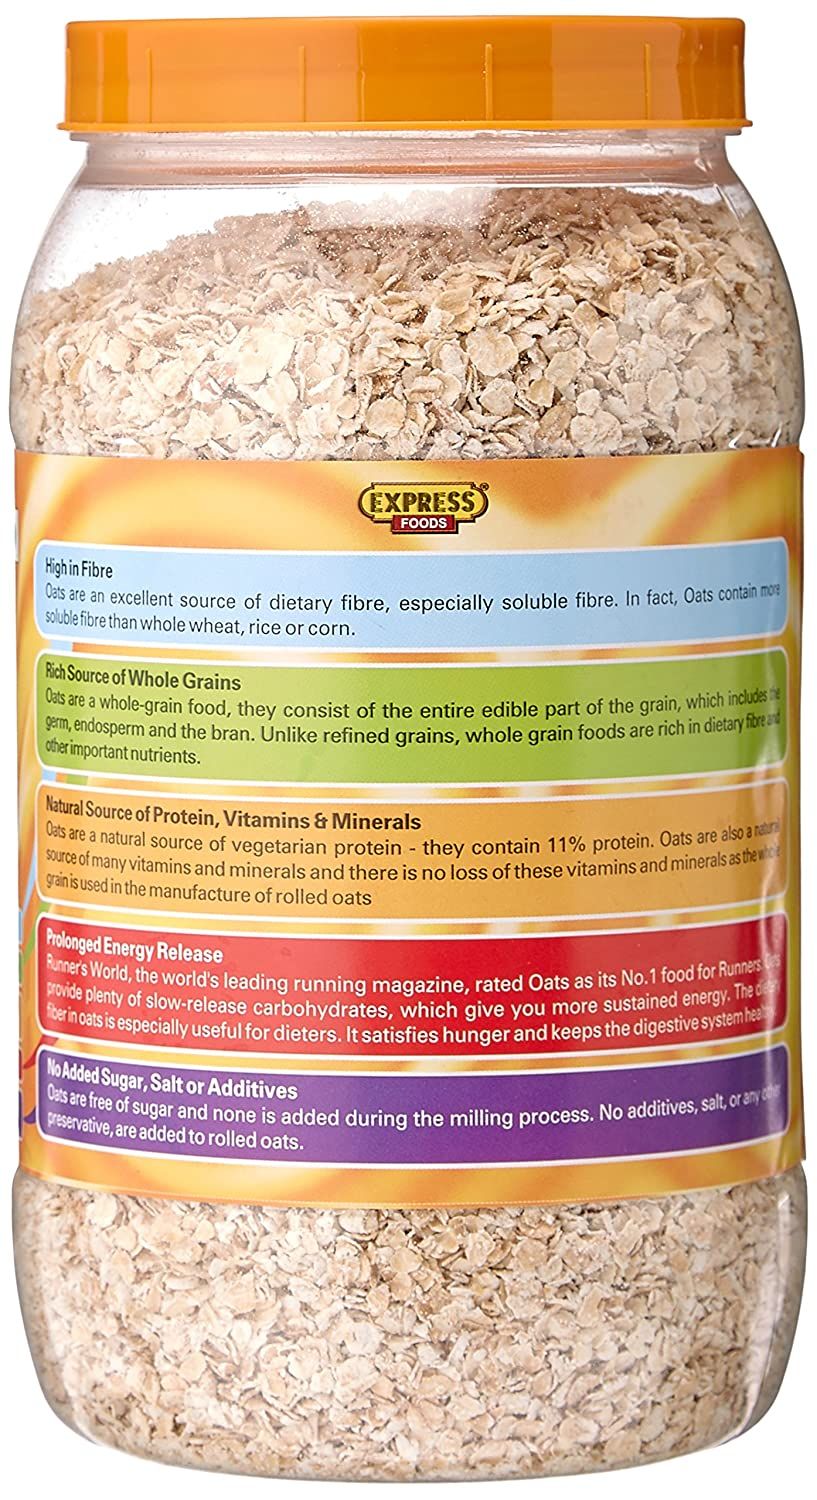 Express Foods White Oats Quick Cooking Image